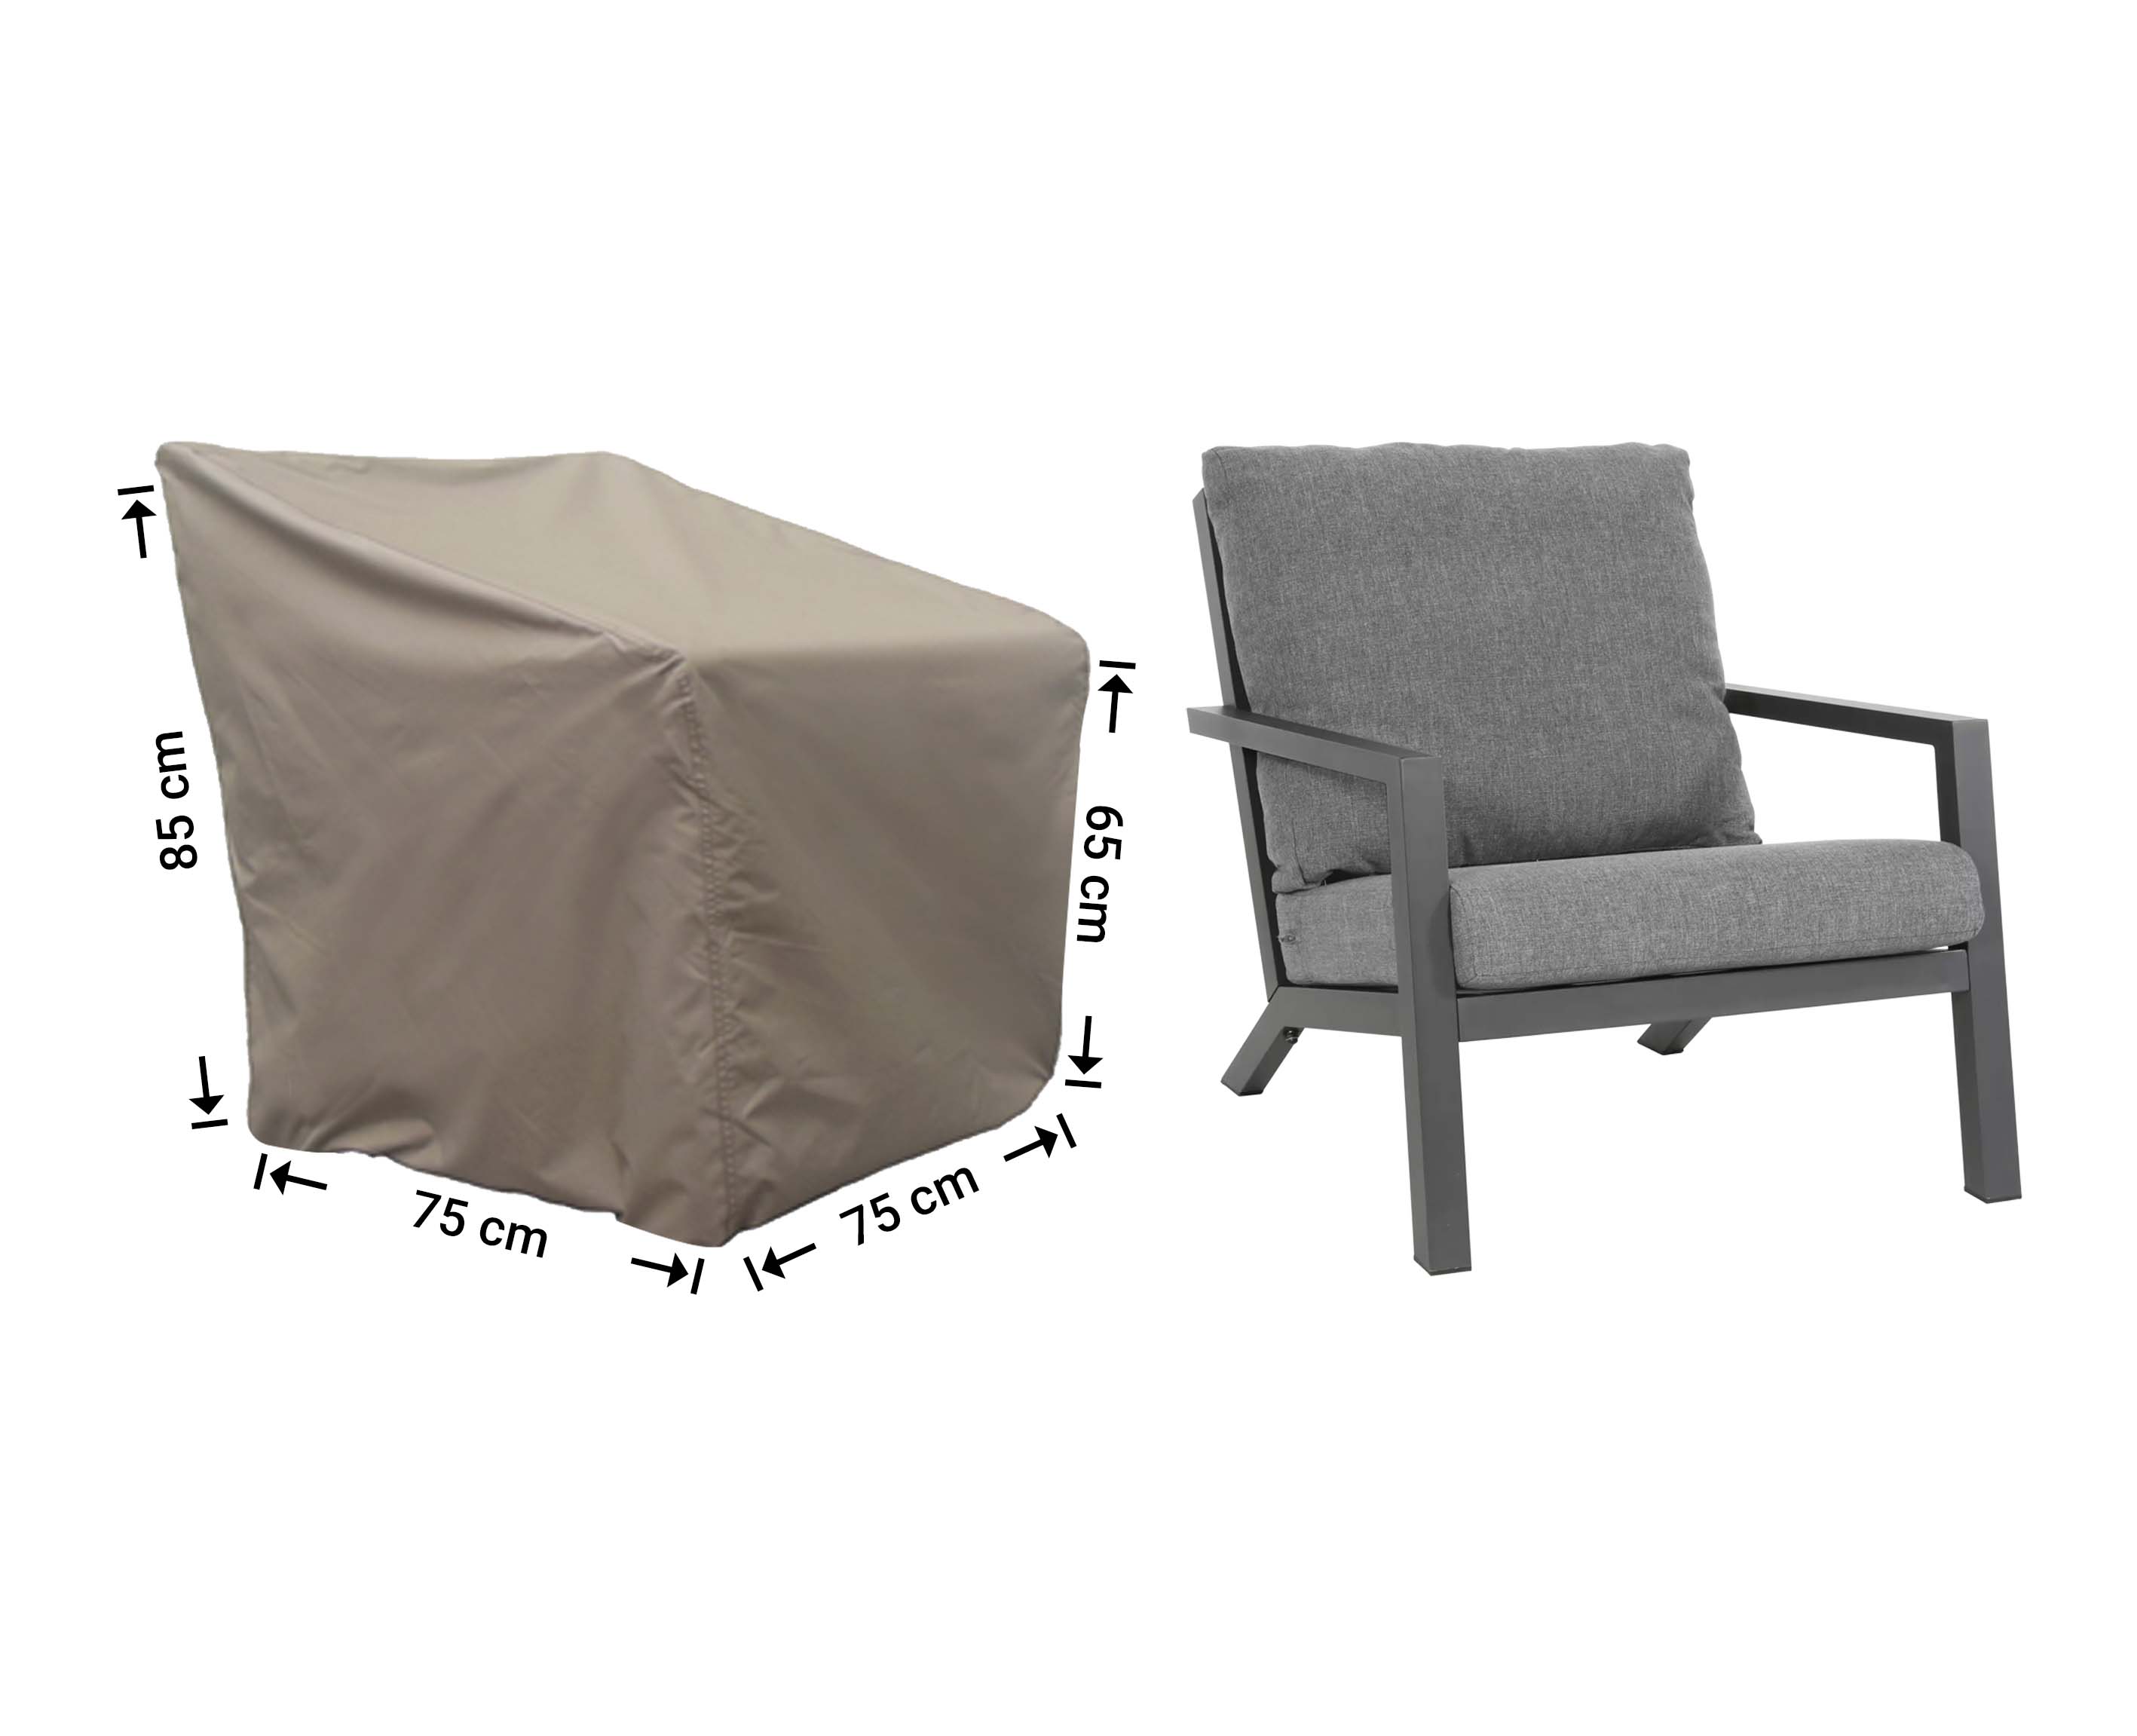 Protective cover for lounge chair 75 x 75 H: 85 /65 cm